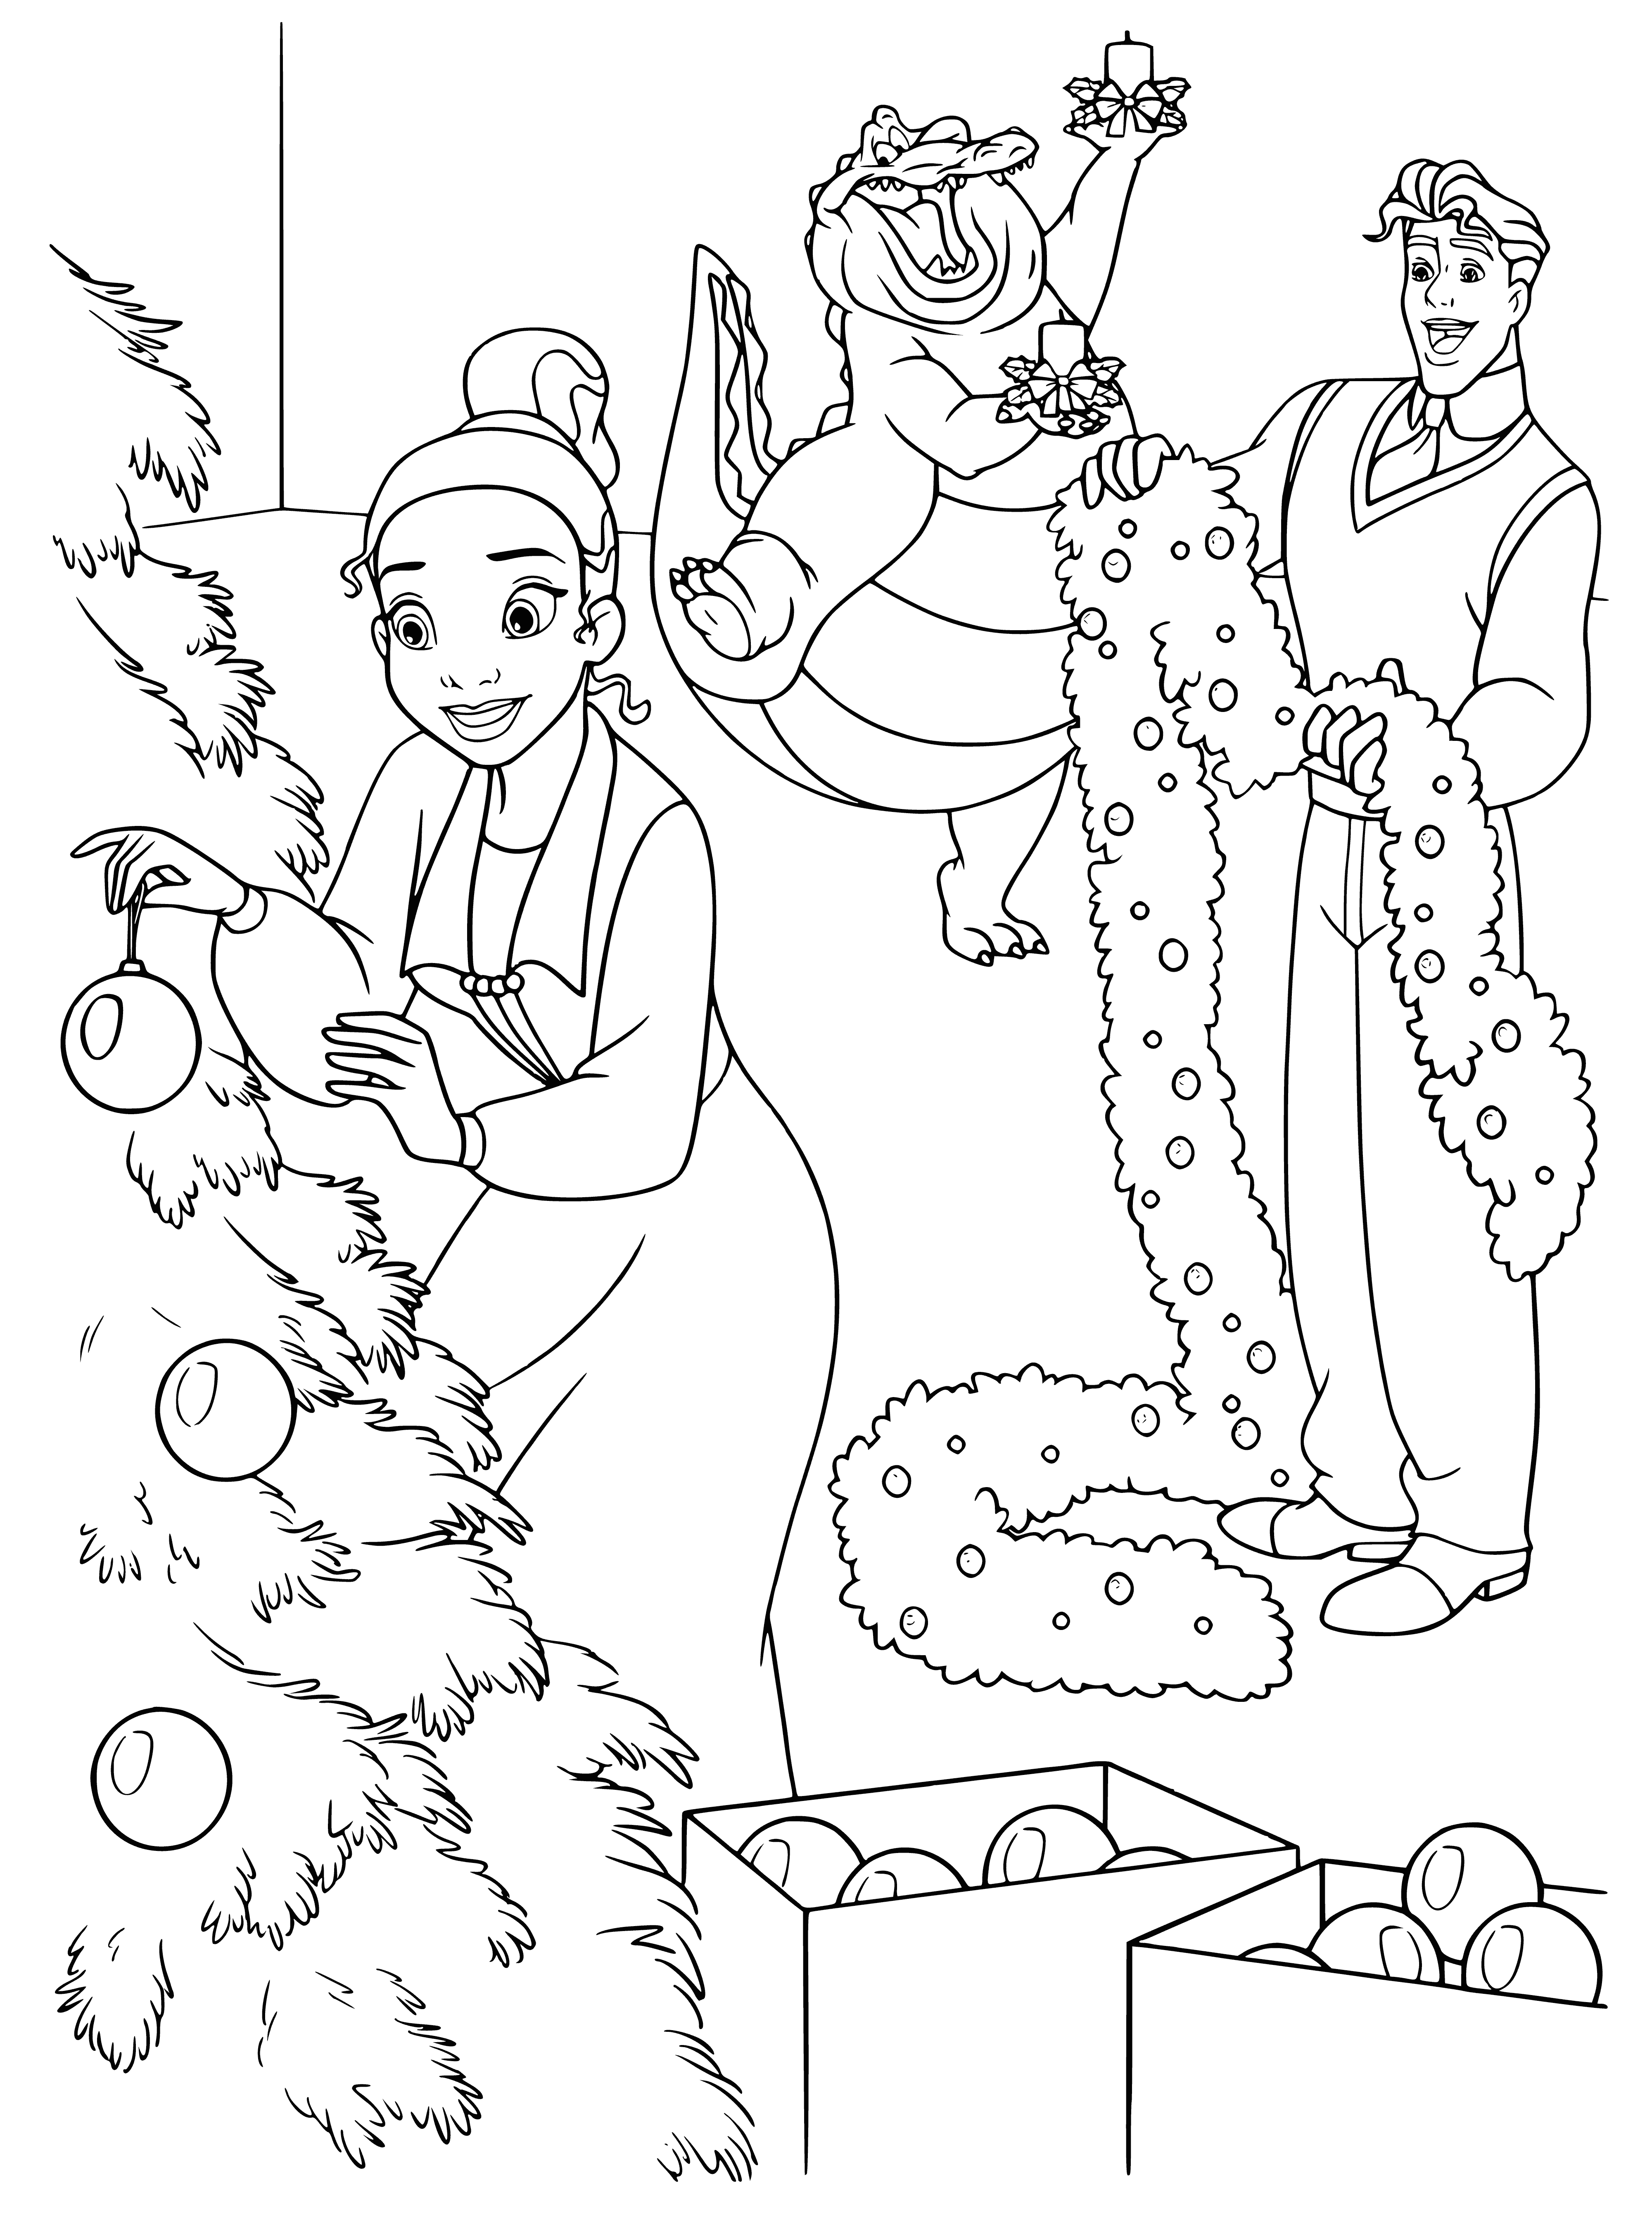 coloring page: Tiana stands in front of a Christmas tree holding a decoration, beaming with joy.